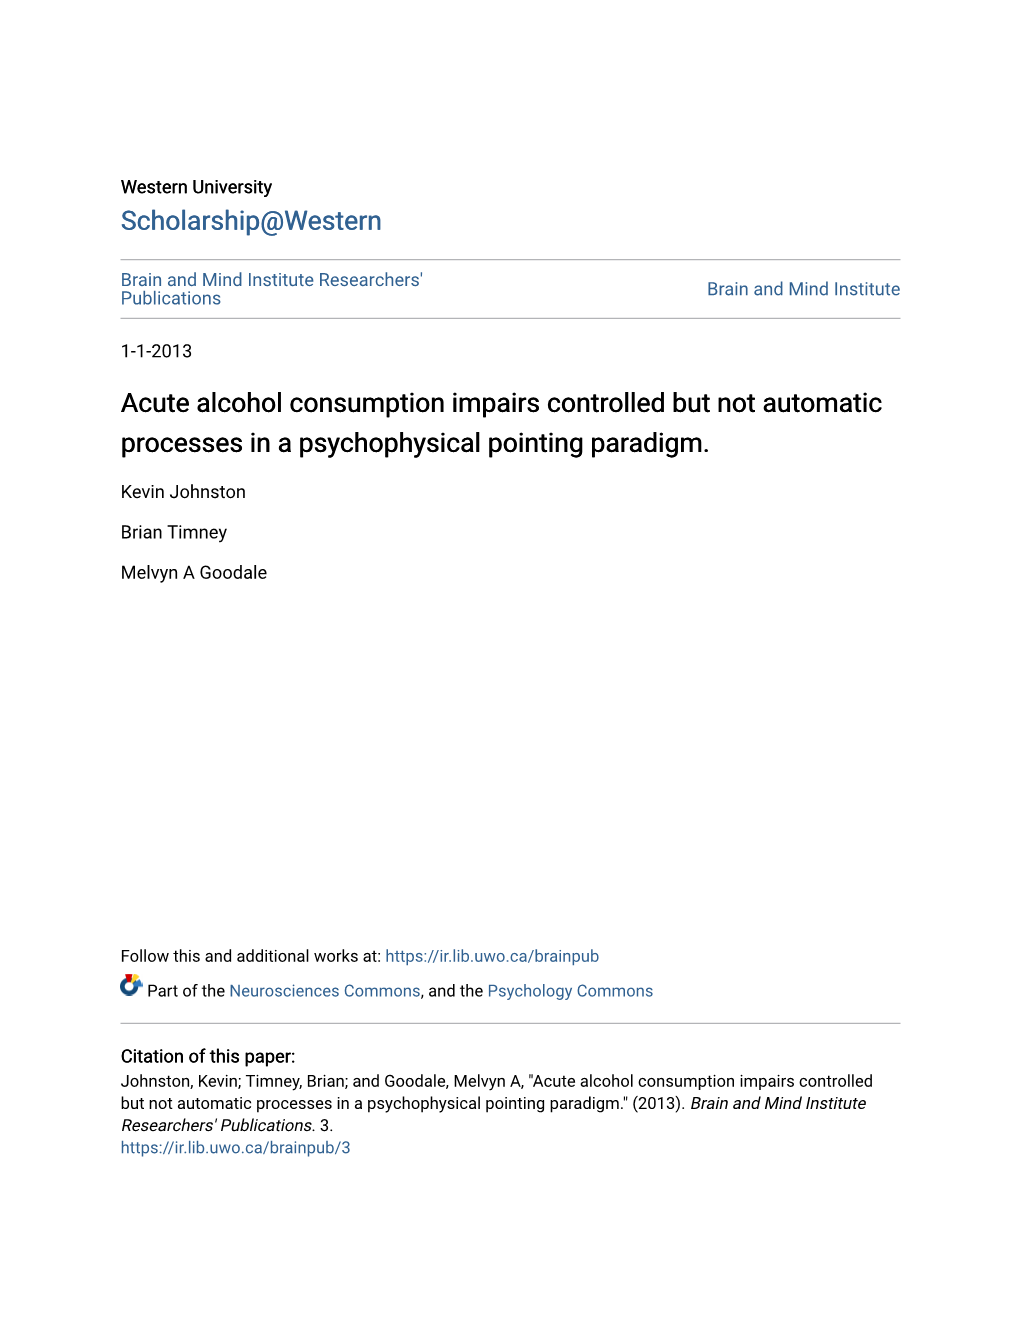 Acute Alcohol Consumption Impairs Controlled but Not Automatic Processes in a Psychophysical Pointing Paradigm